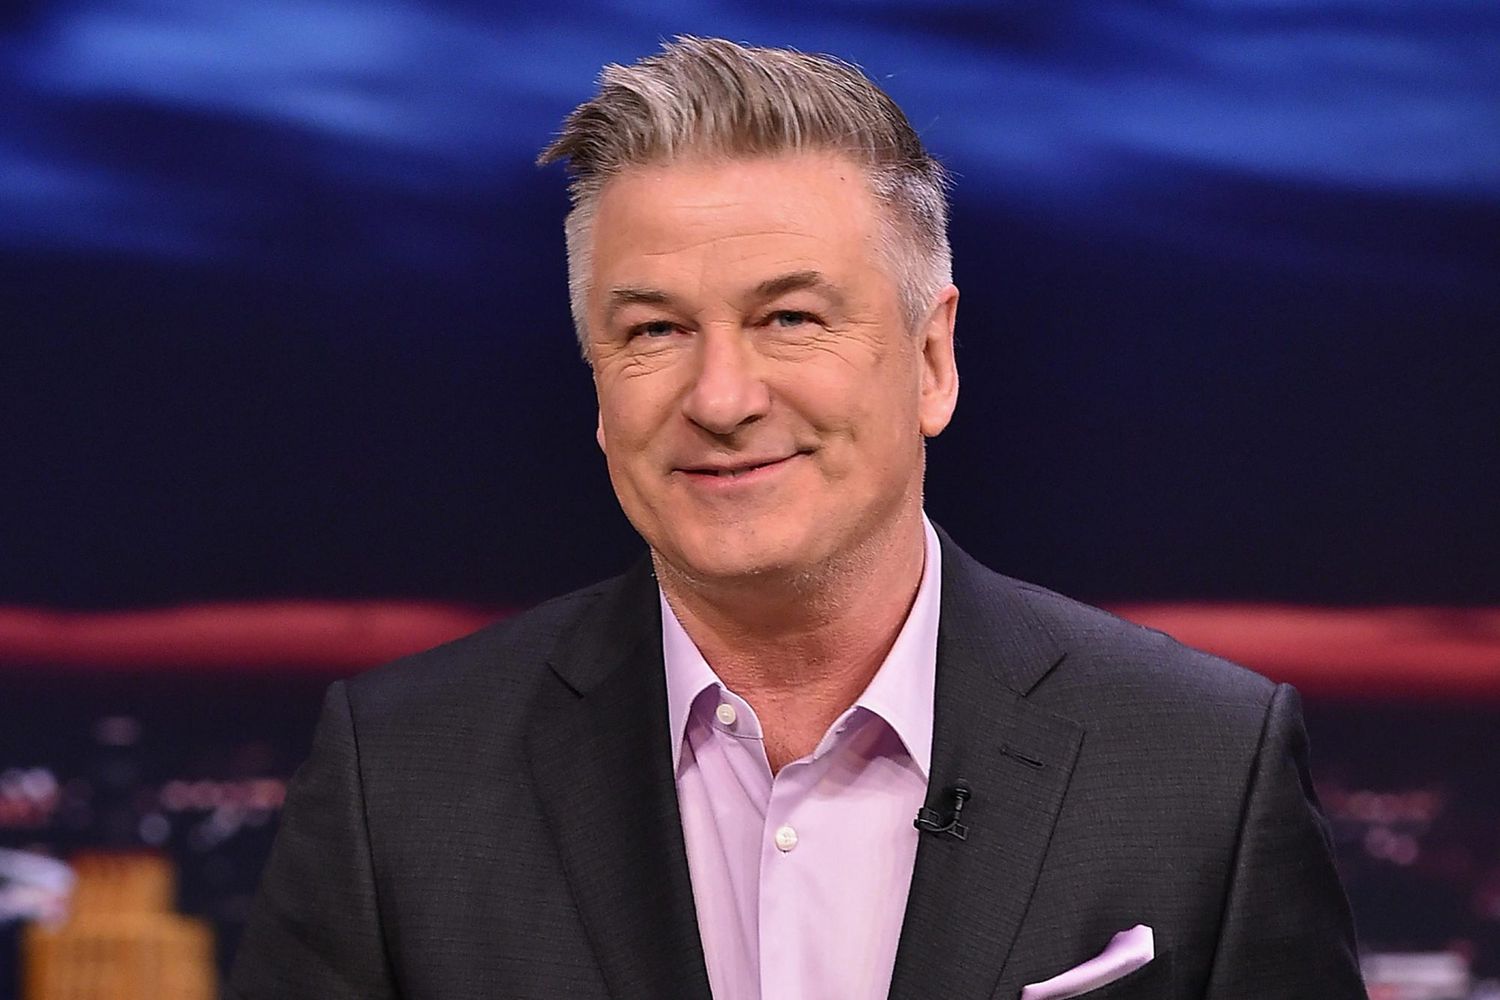 Alec Baldwin is ready to see a new face in the White House.